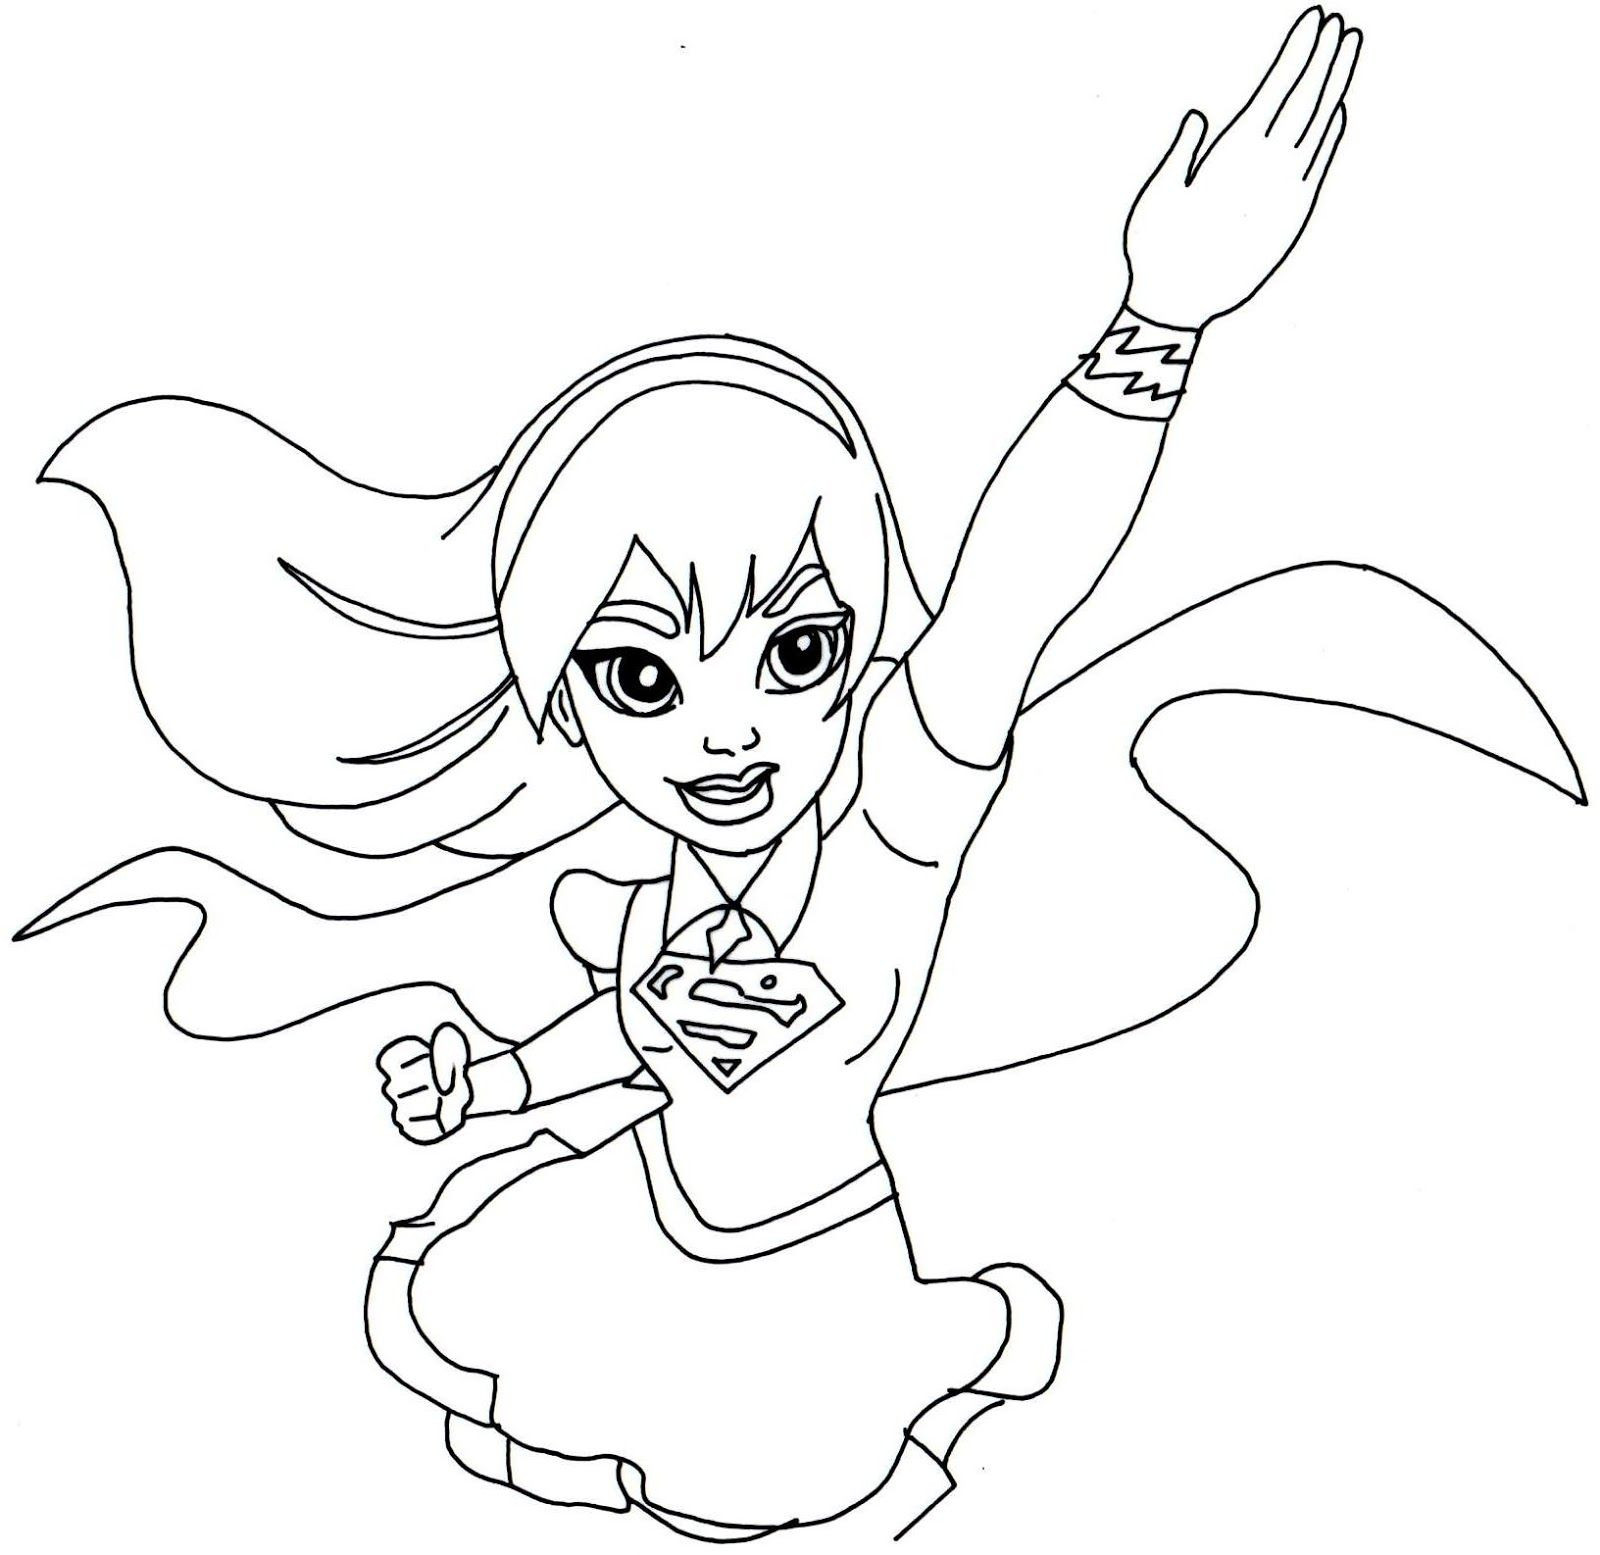 Dc Girls Coloring Pages
 Free printable super hero high coloring page for Supergirl